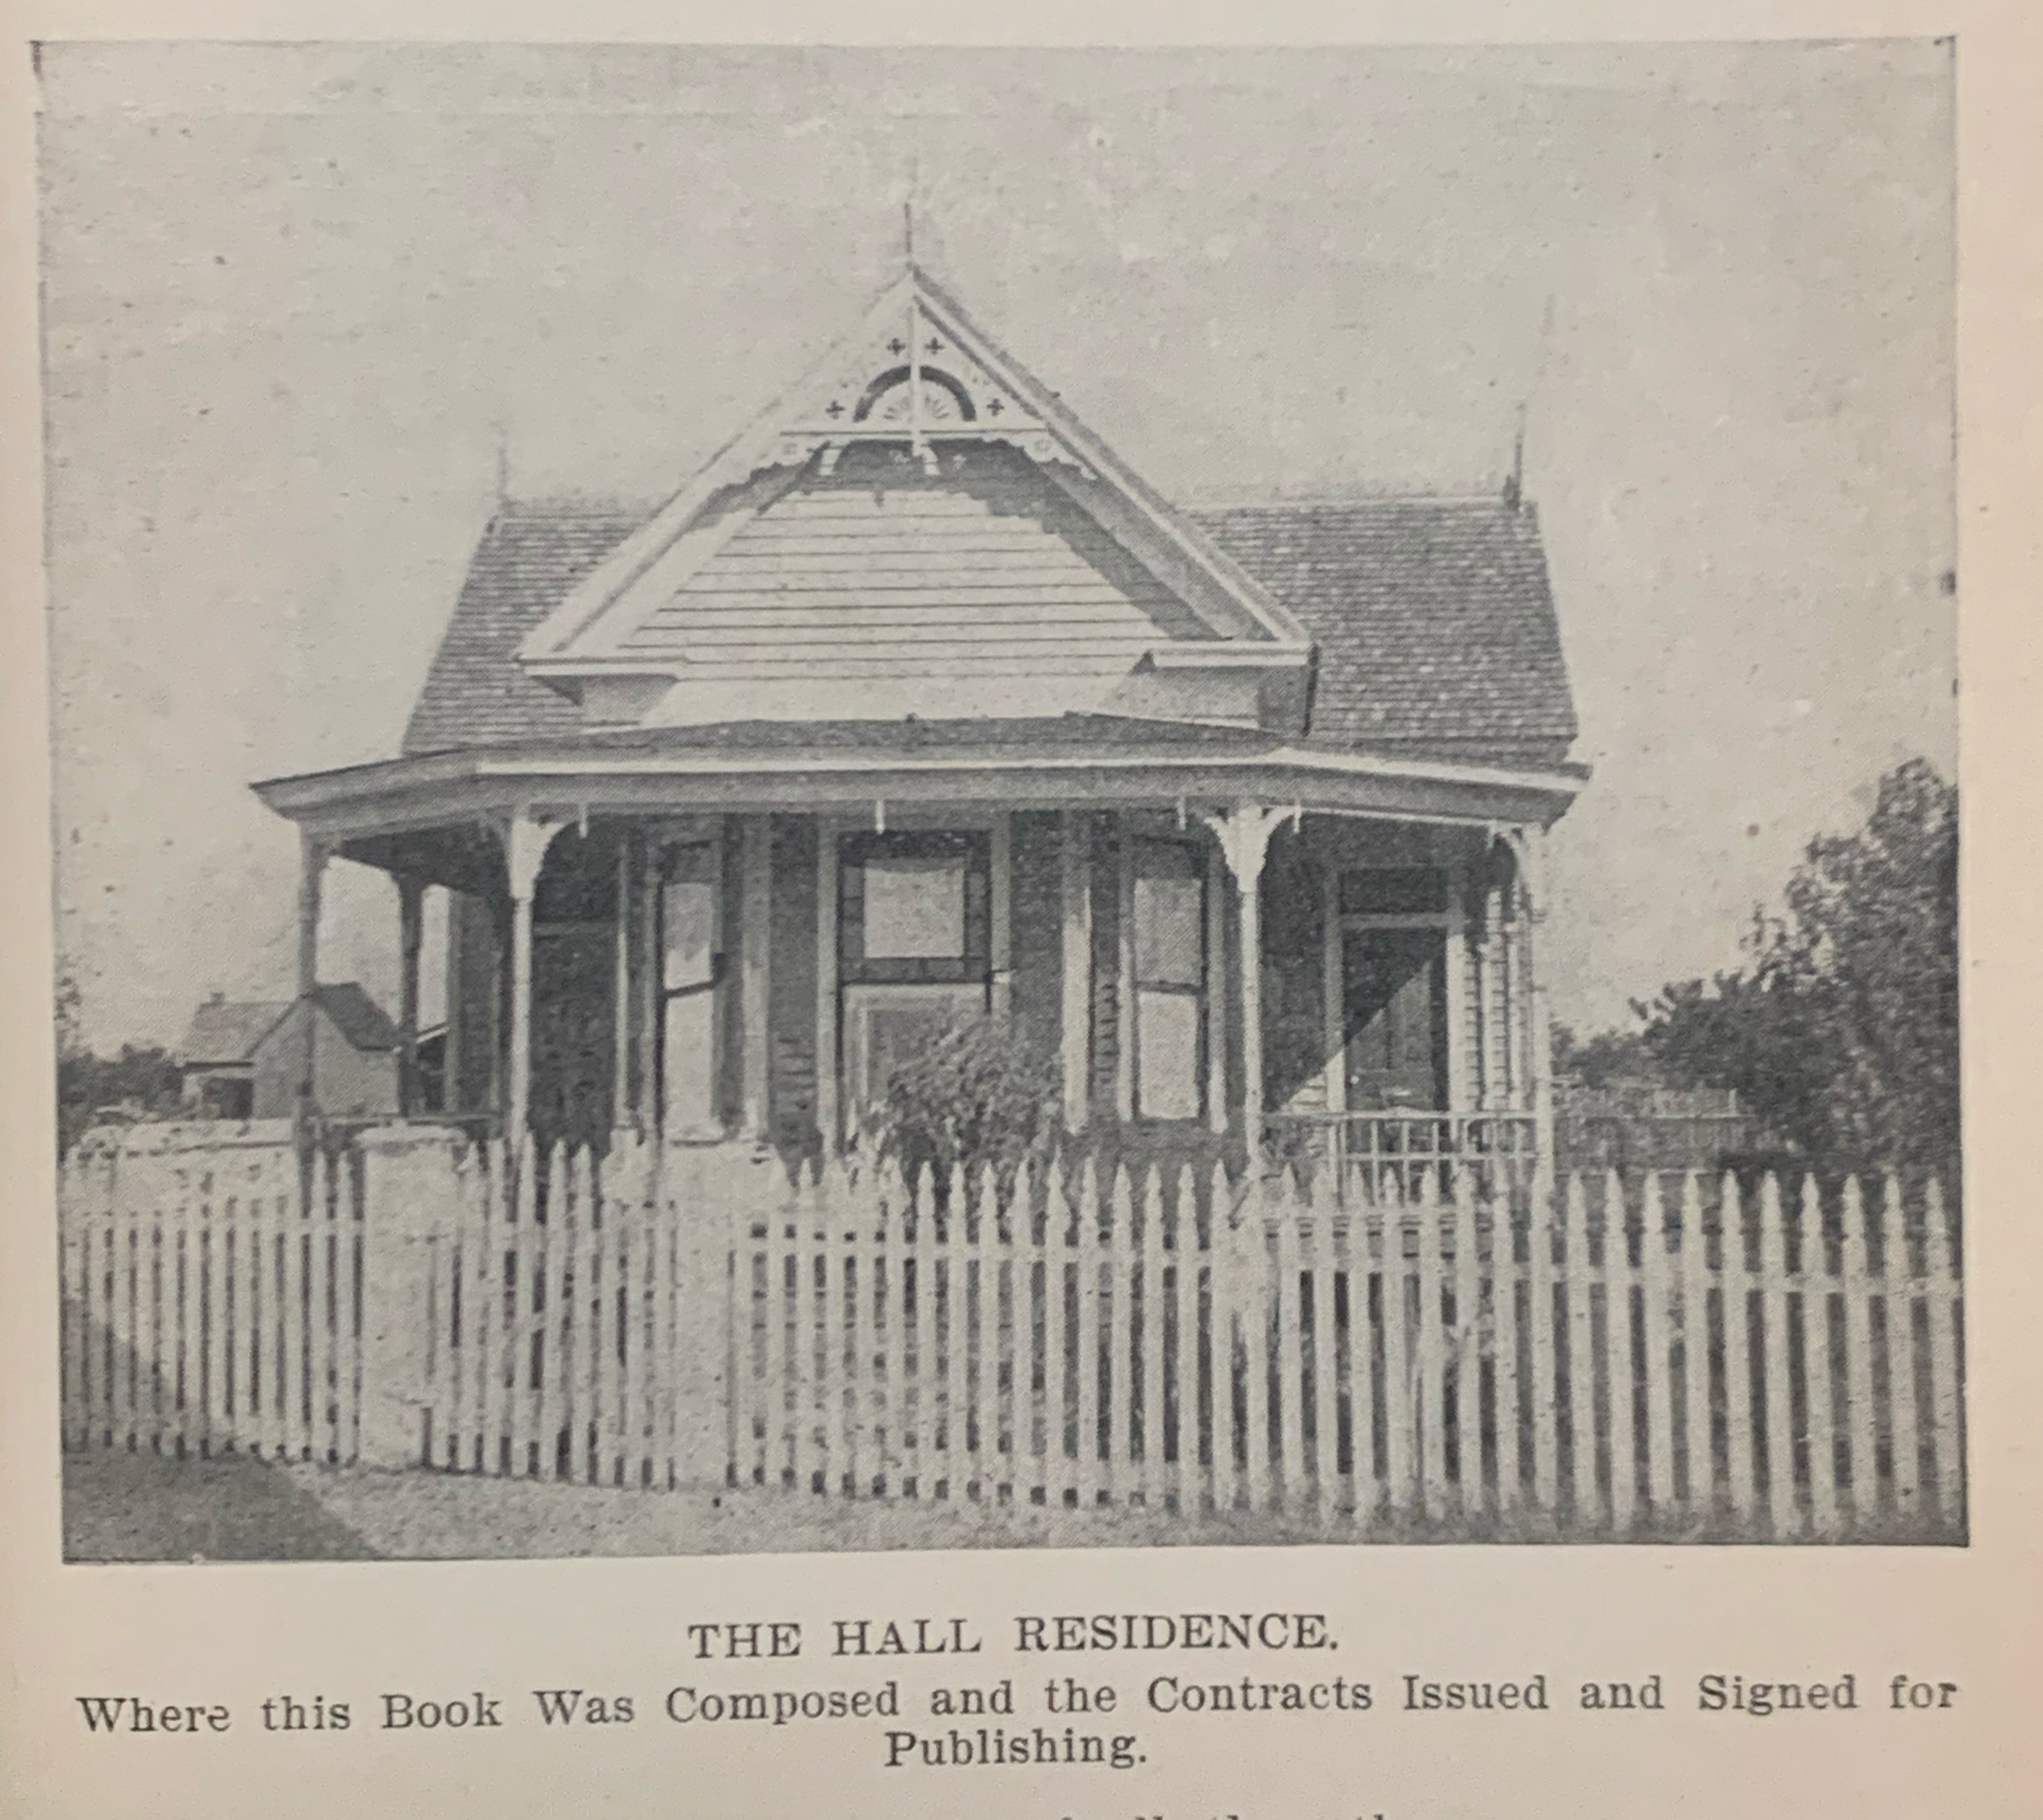 A single story Queen Anne's style home, with picket fence. Text reads: The Hall Residence. Where this book was composed and the contracts issues and signed for publishing.